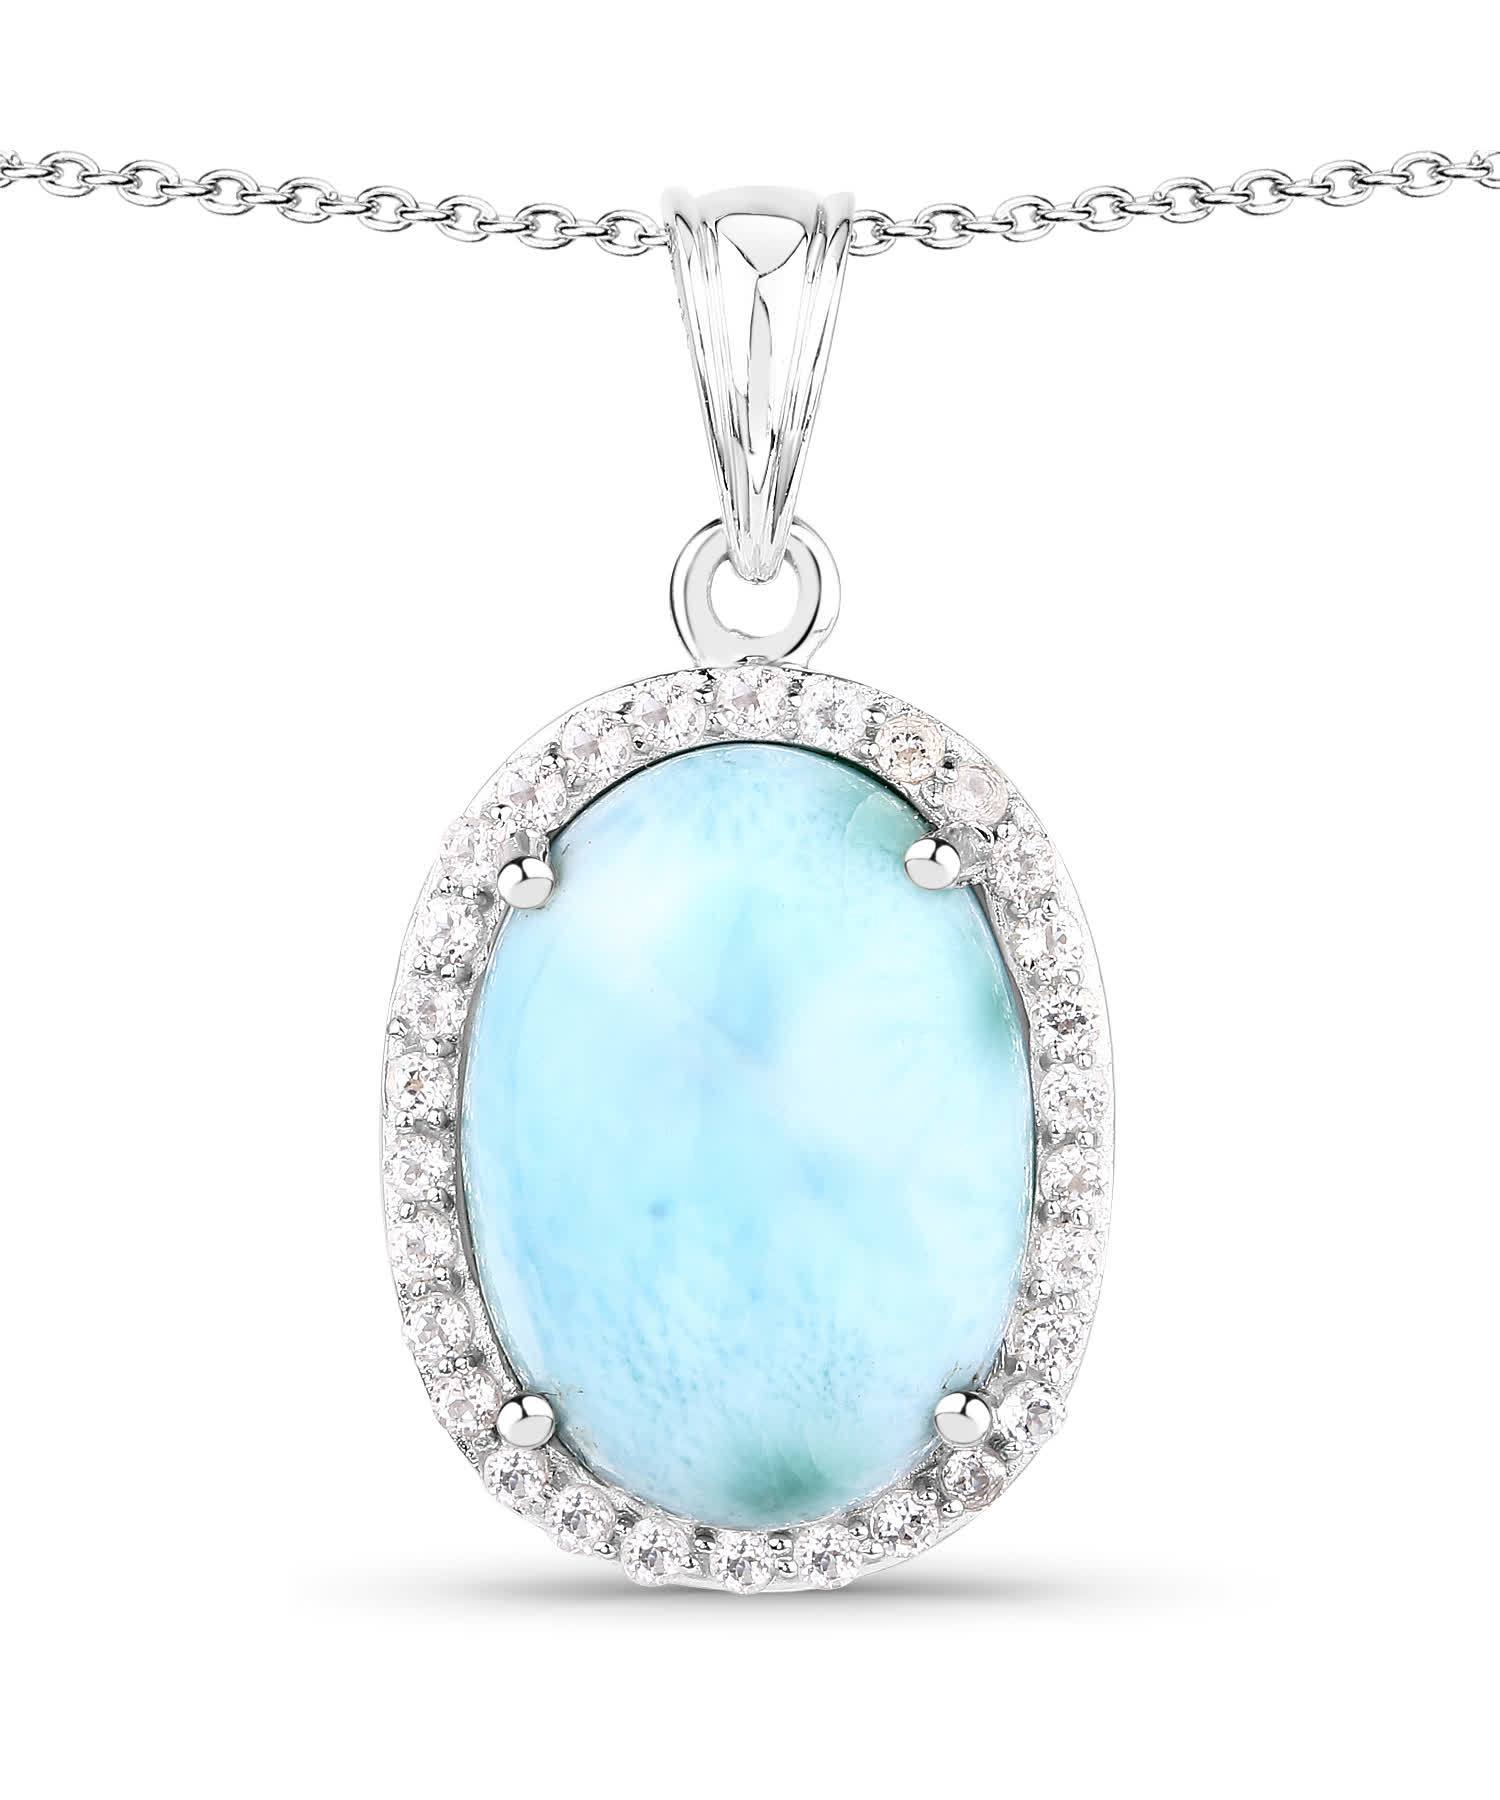 13.55ctw Natural Larimar and Topaz Rhodium Plated 925 Sterling Silver Halo Pendant With Chain View 1